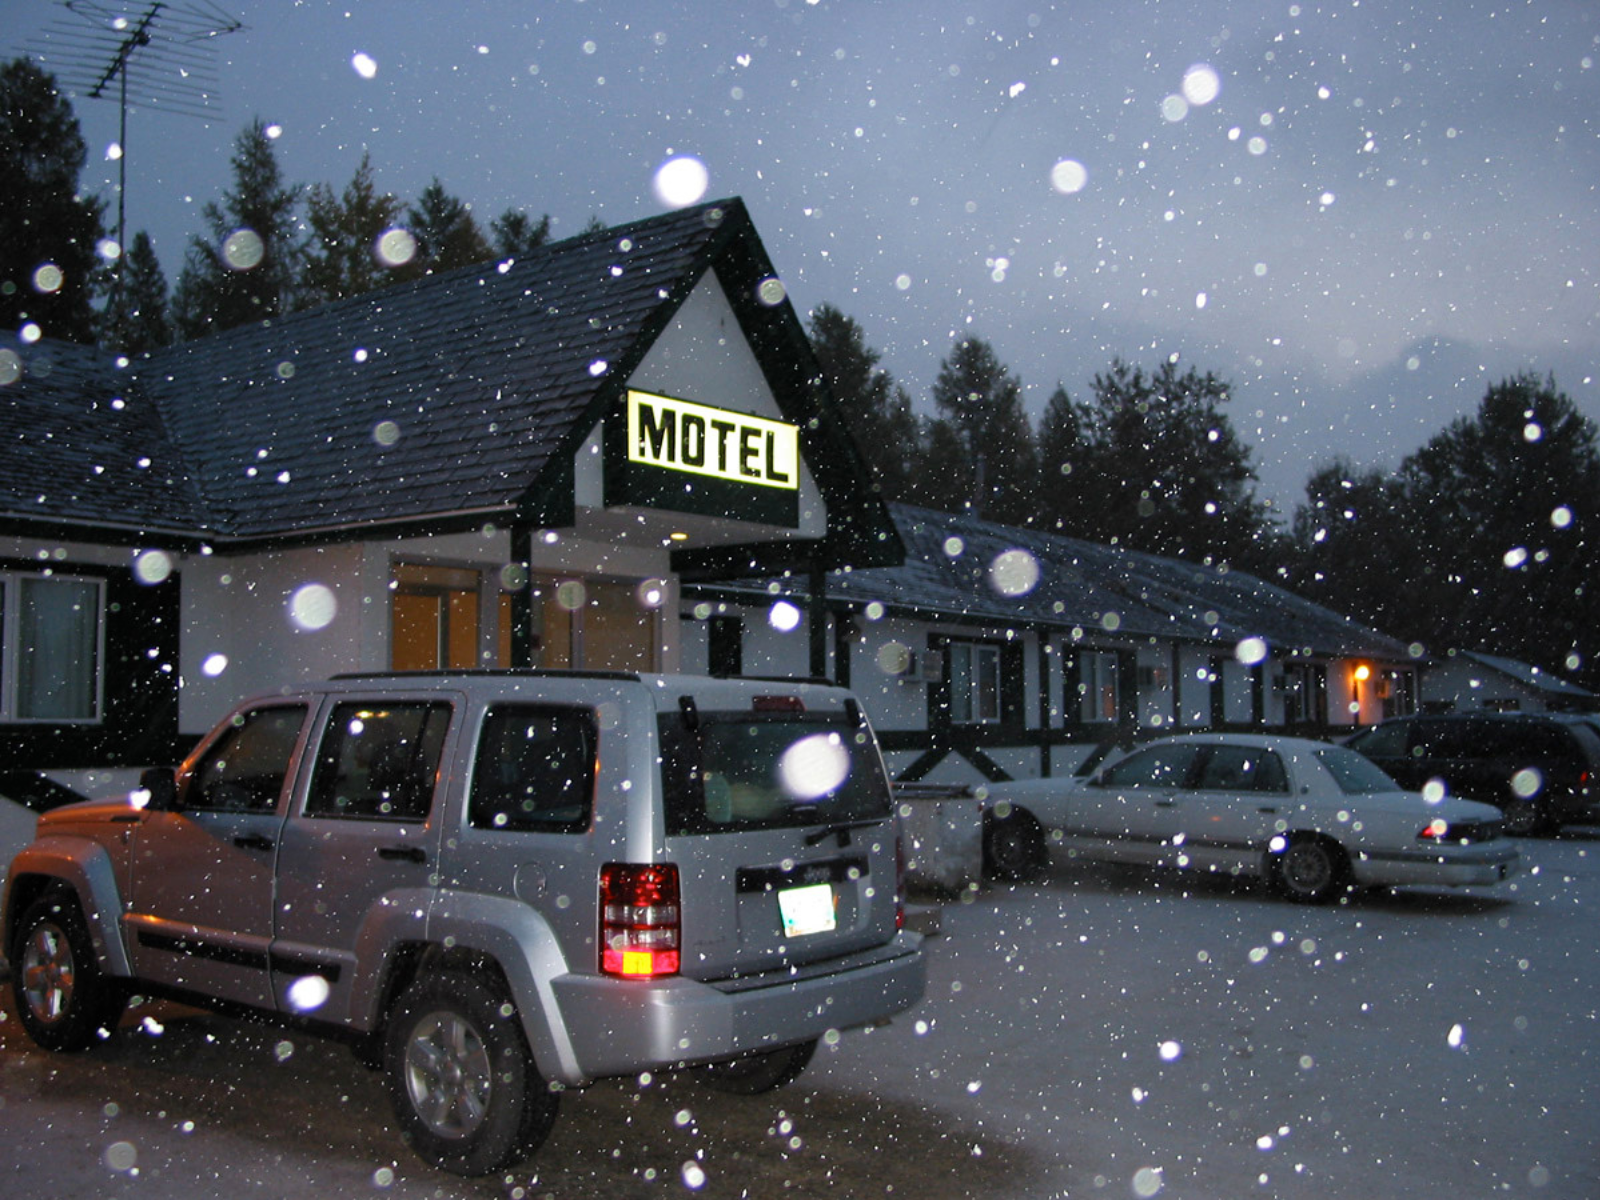 The exterior of a single-storey motels with several vehicles parked in front. Early morning light, with snow falling.